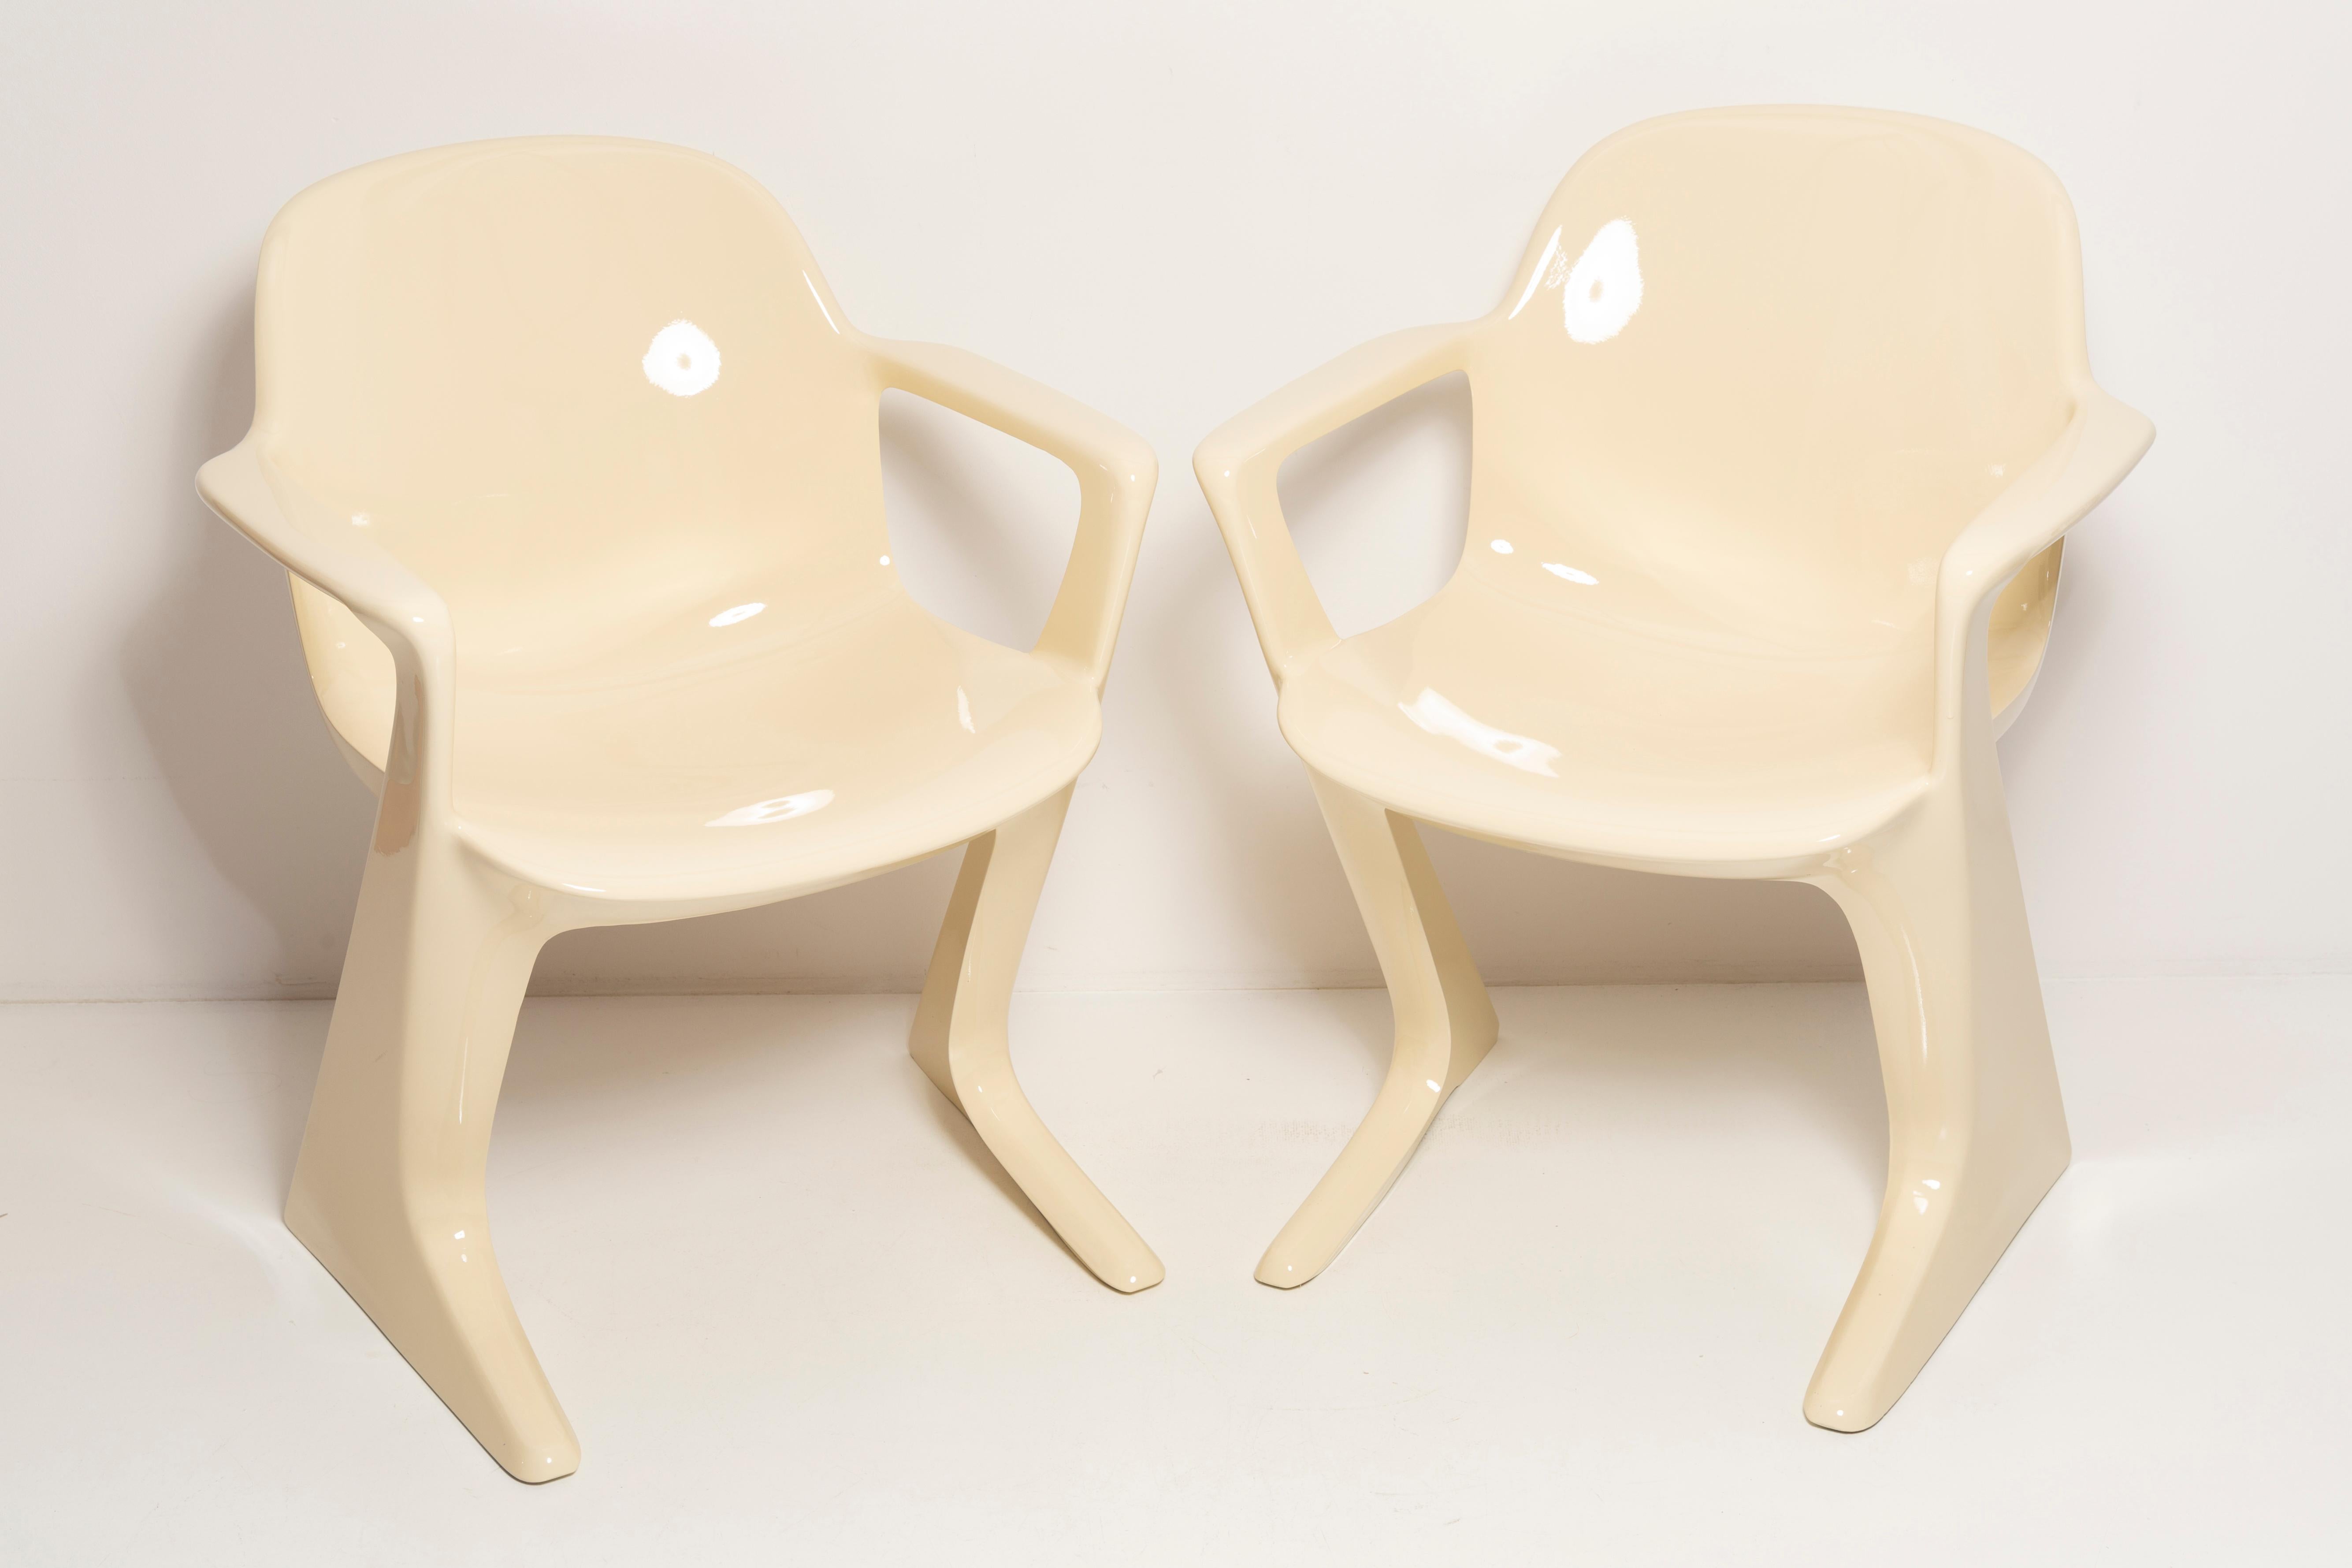 Fiberglass Four Mid-Century Pink Beige Red Kangaroo Chairs, Ernst Moeckl, Germany, 1960s For Sale